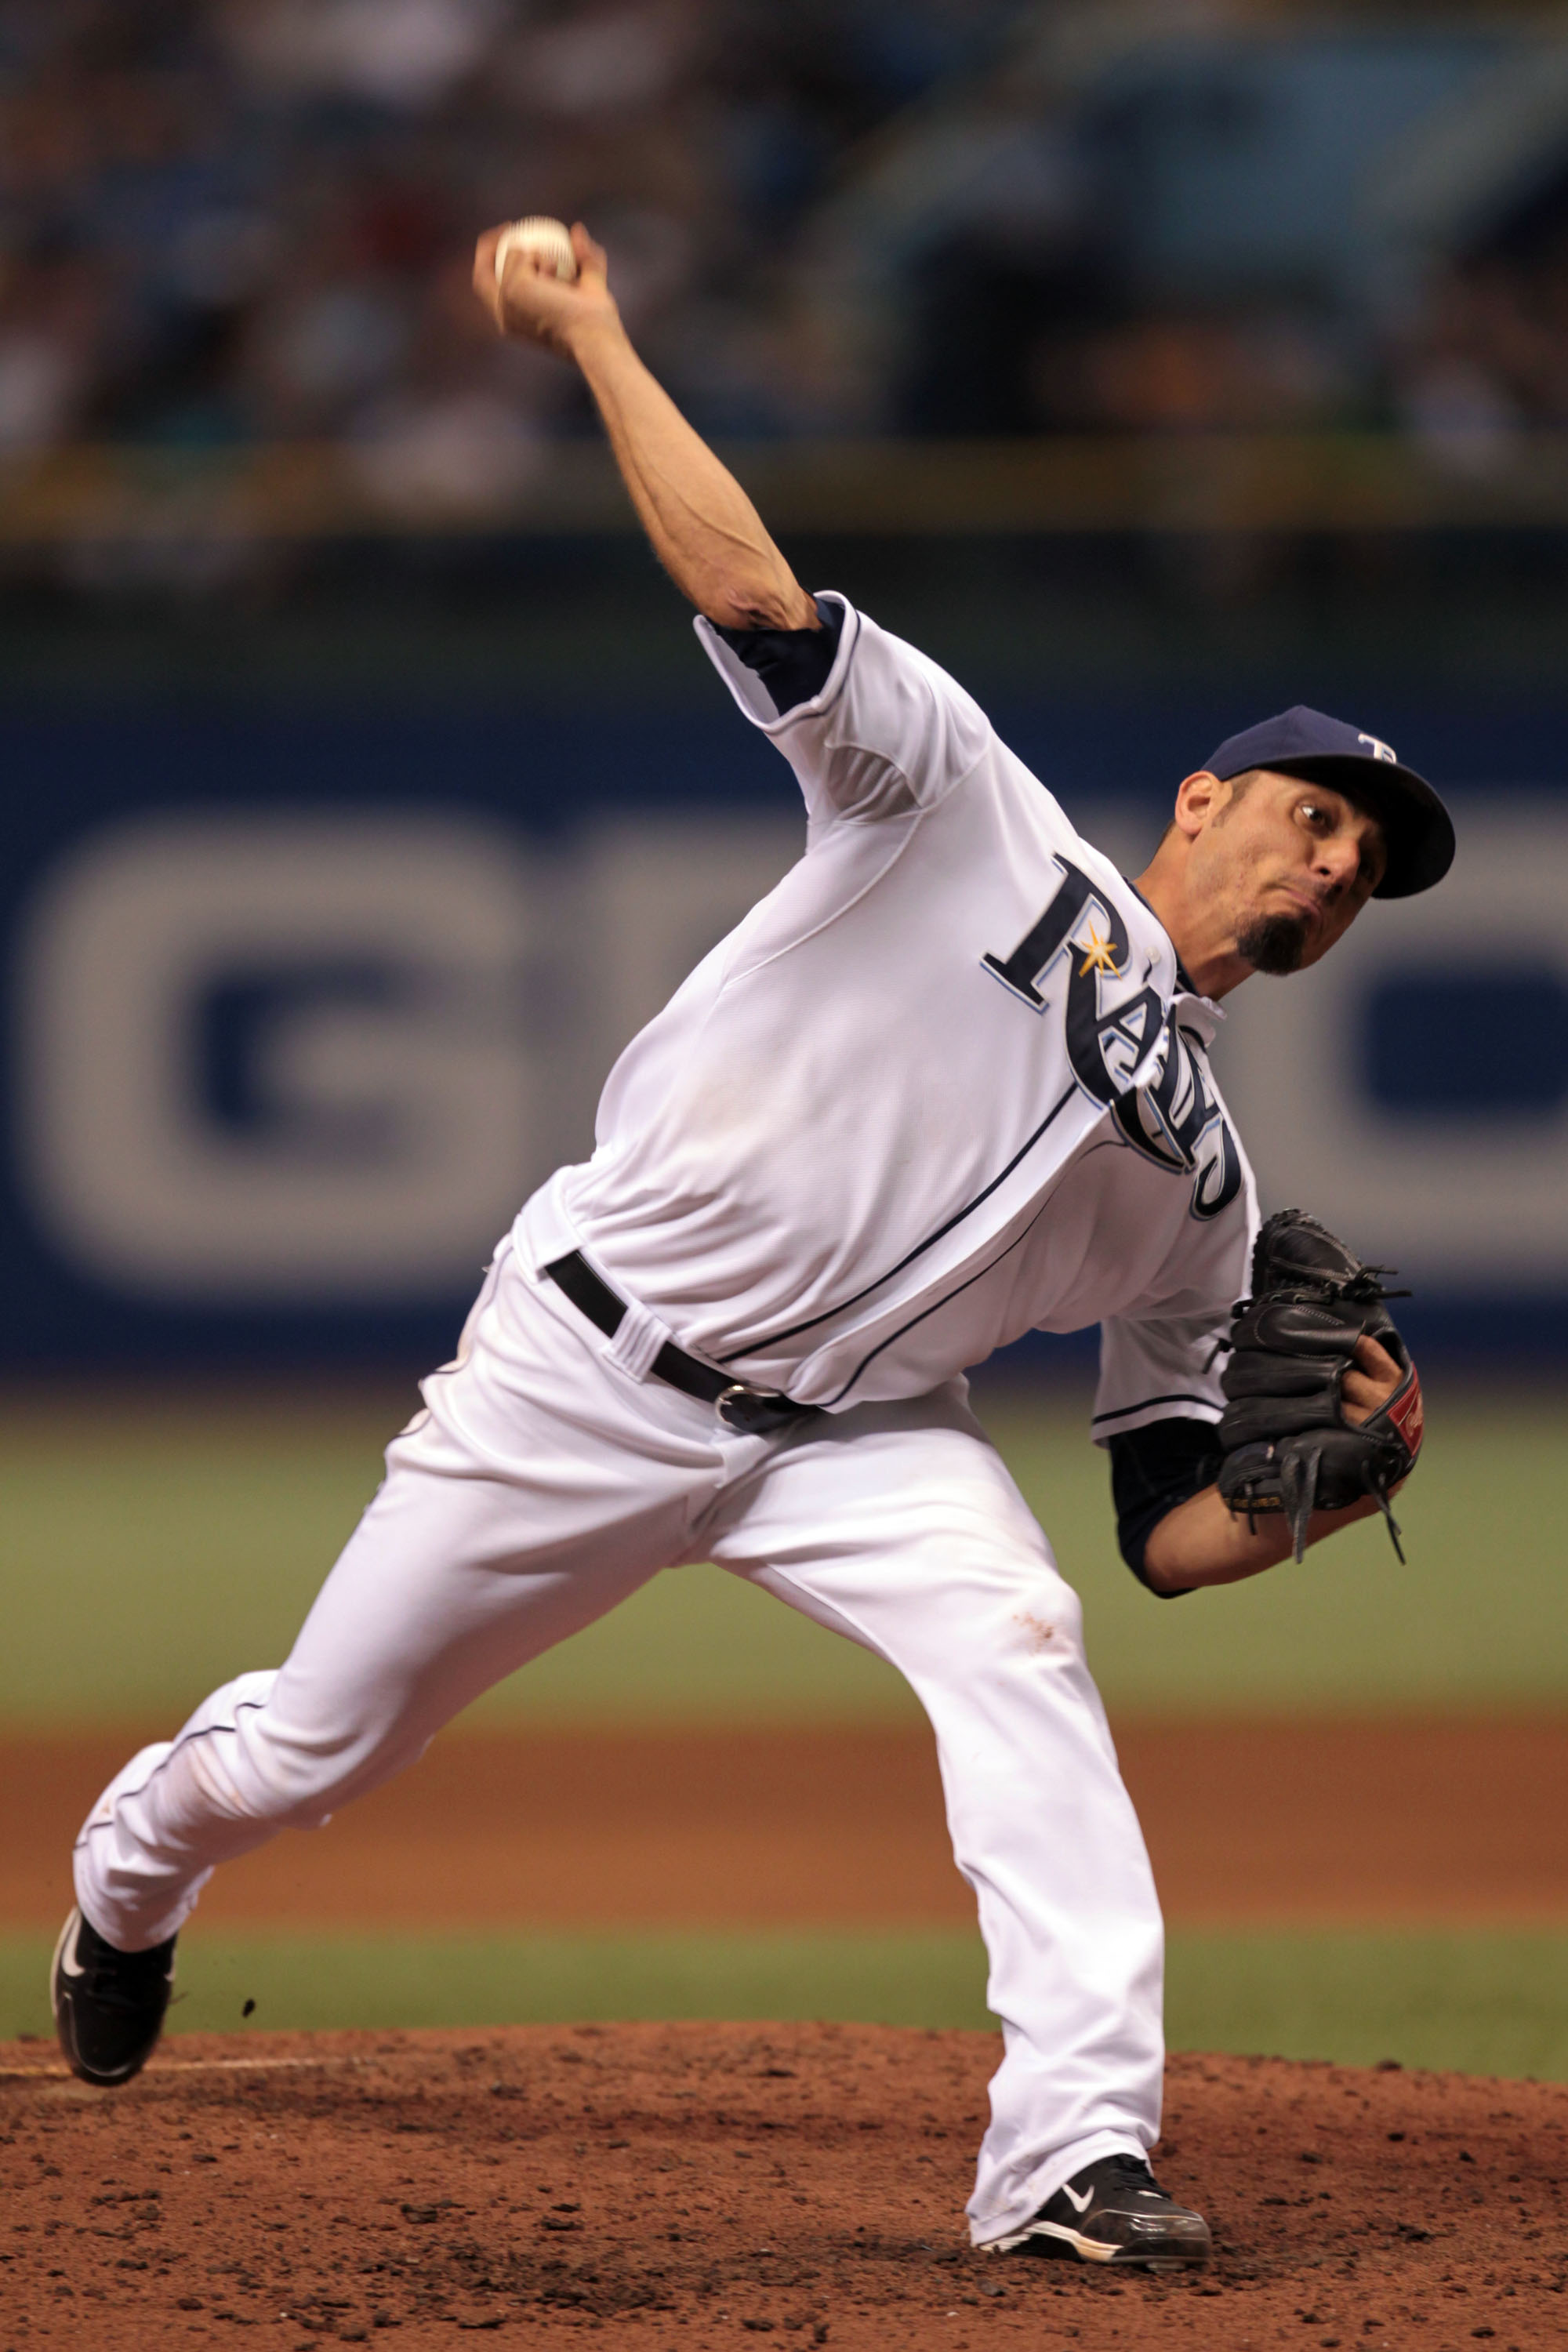 ST PETERSBURG, FL - SEPTEMBER 25: Pitcher Matt Garza #22 of the Tampa Bay Rays delivers a pitch against the Seattle Mariners at Tropicana Field on September 25, 2010 in St. Petersburg, Florida. (Photo by Eliot J. Schechter/Getty Images)